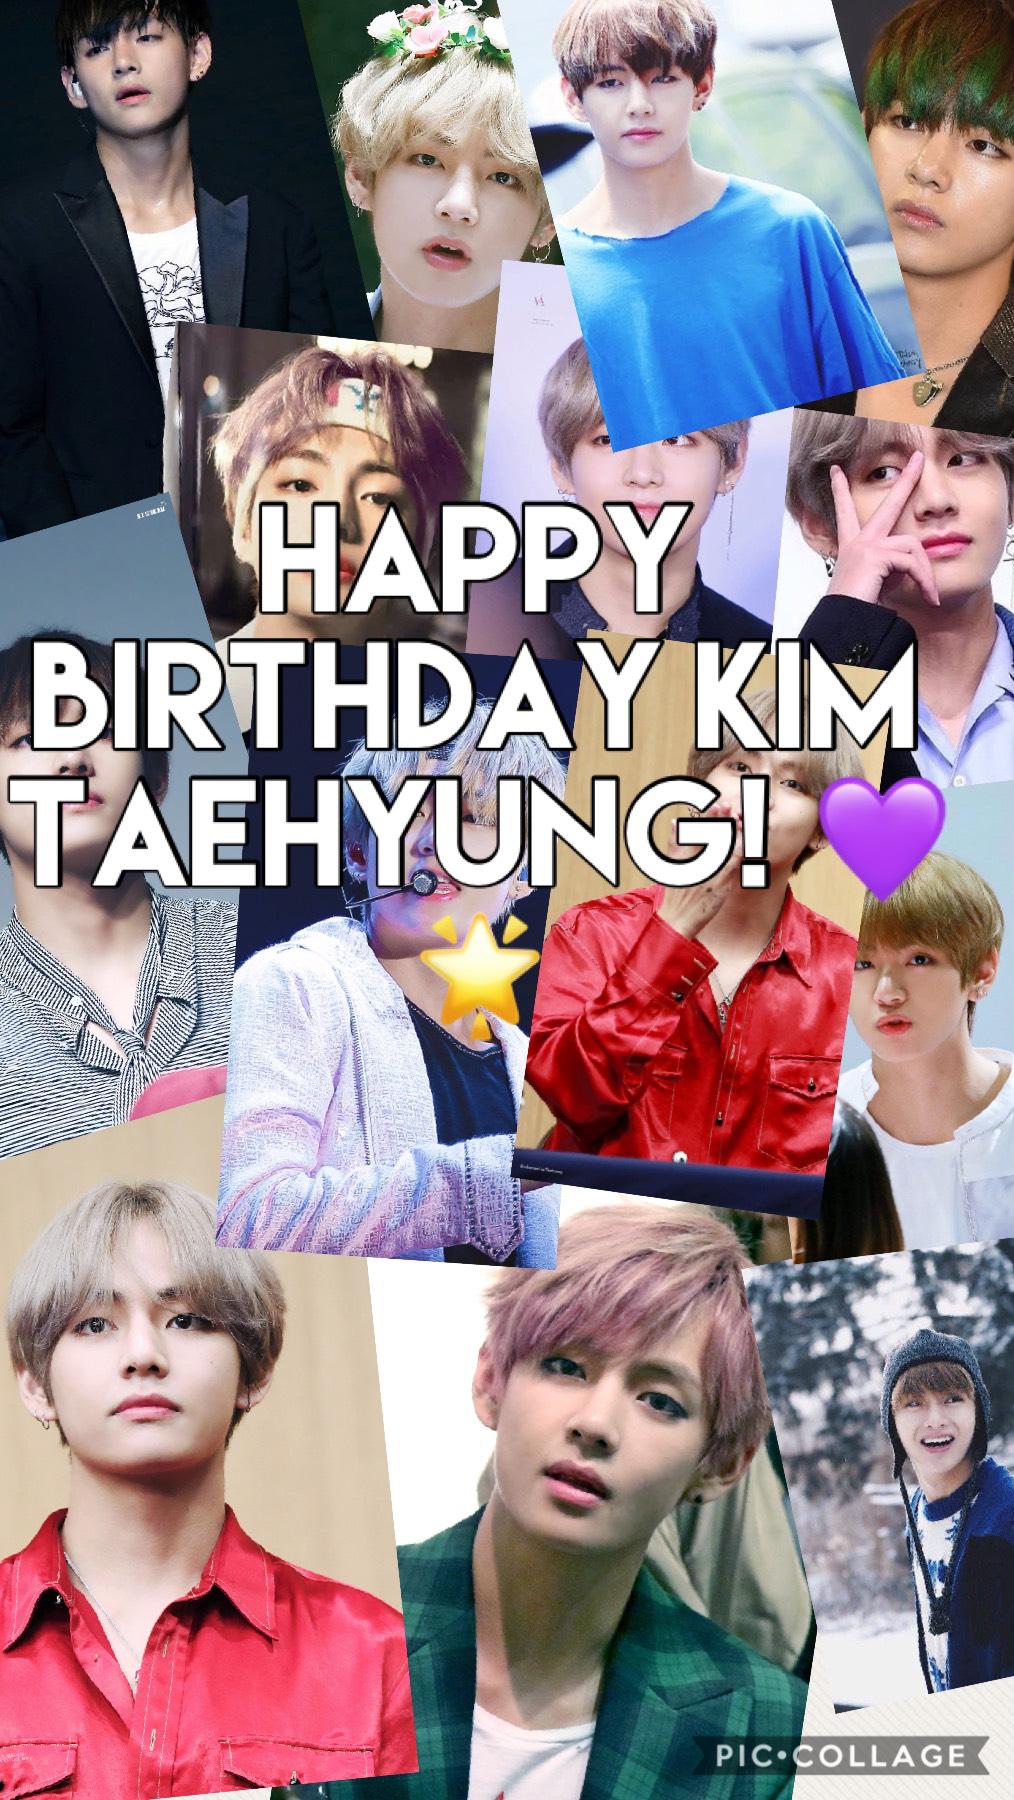 I AM SO SORRY I AM LATE!!!! Taehyung I purple so much! You are and will be my sunshine forever :) you are a great singer, a great dancer, and have great personality! I hope you keep being the best buddy I have ever known. I purple you SO much 💜💜